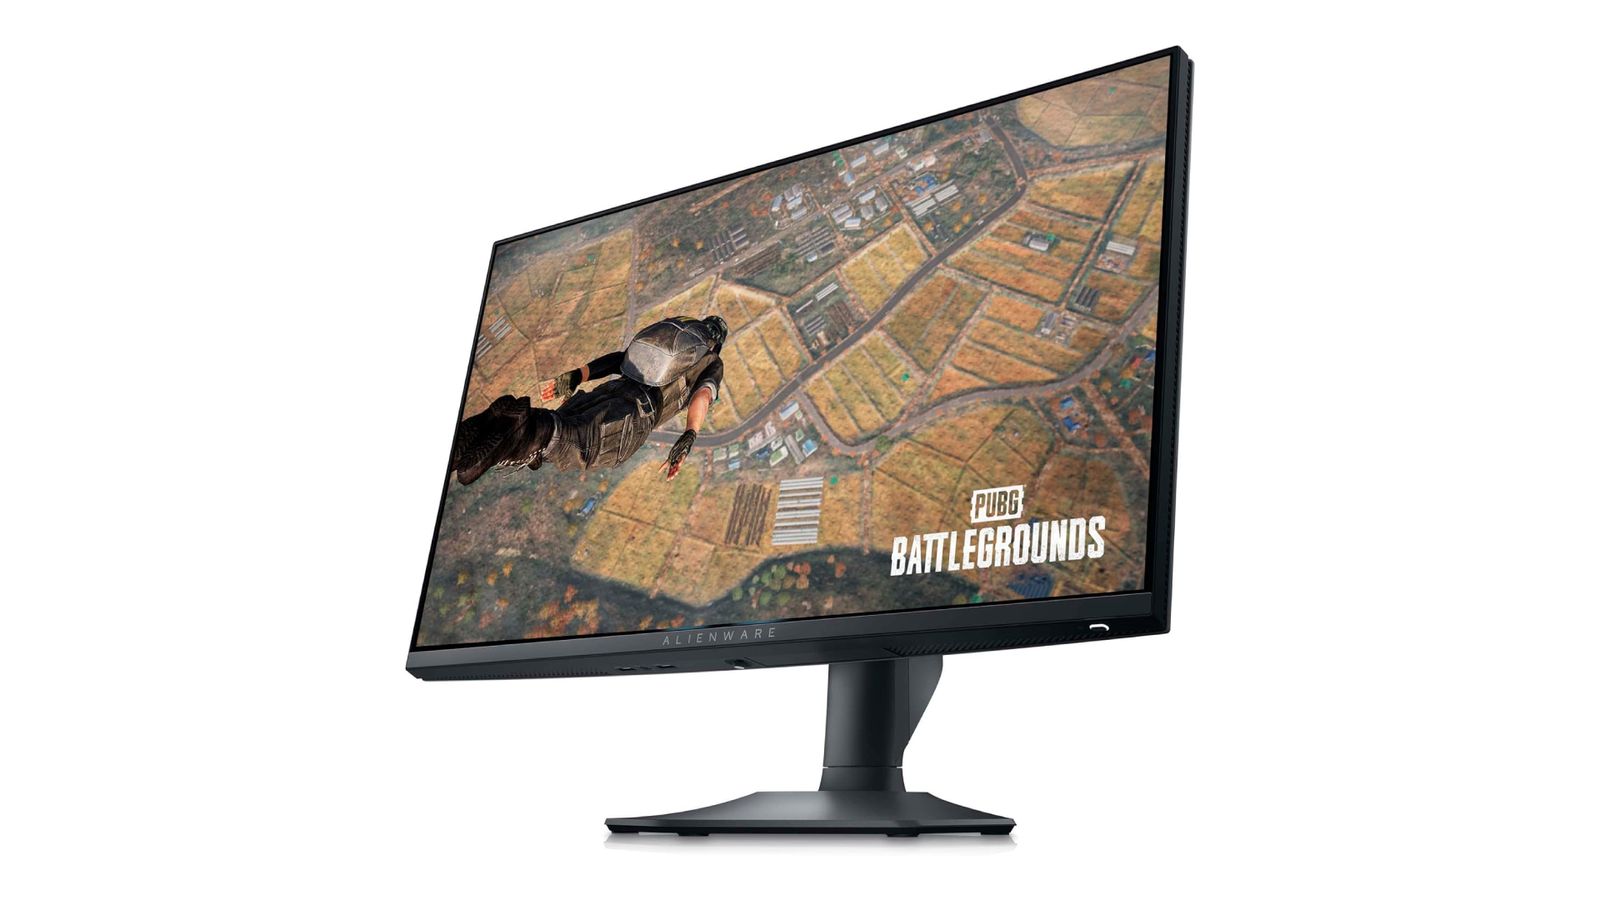 Alienware AW2523HF product image of a black monitor with PUGB Battlegrounds gameplay on the display.